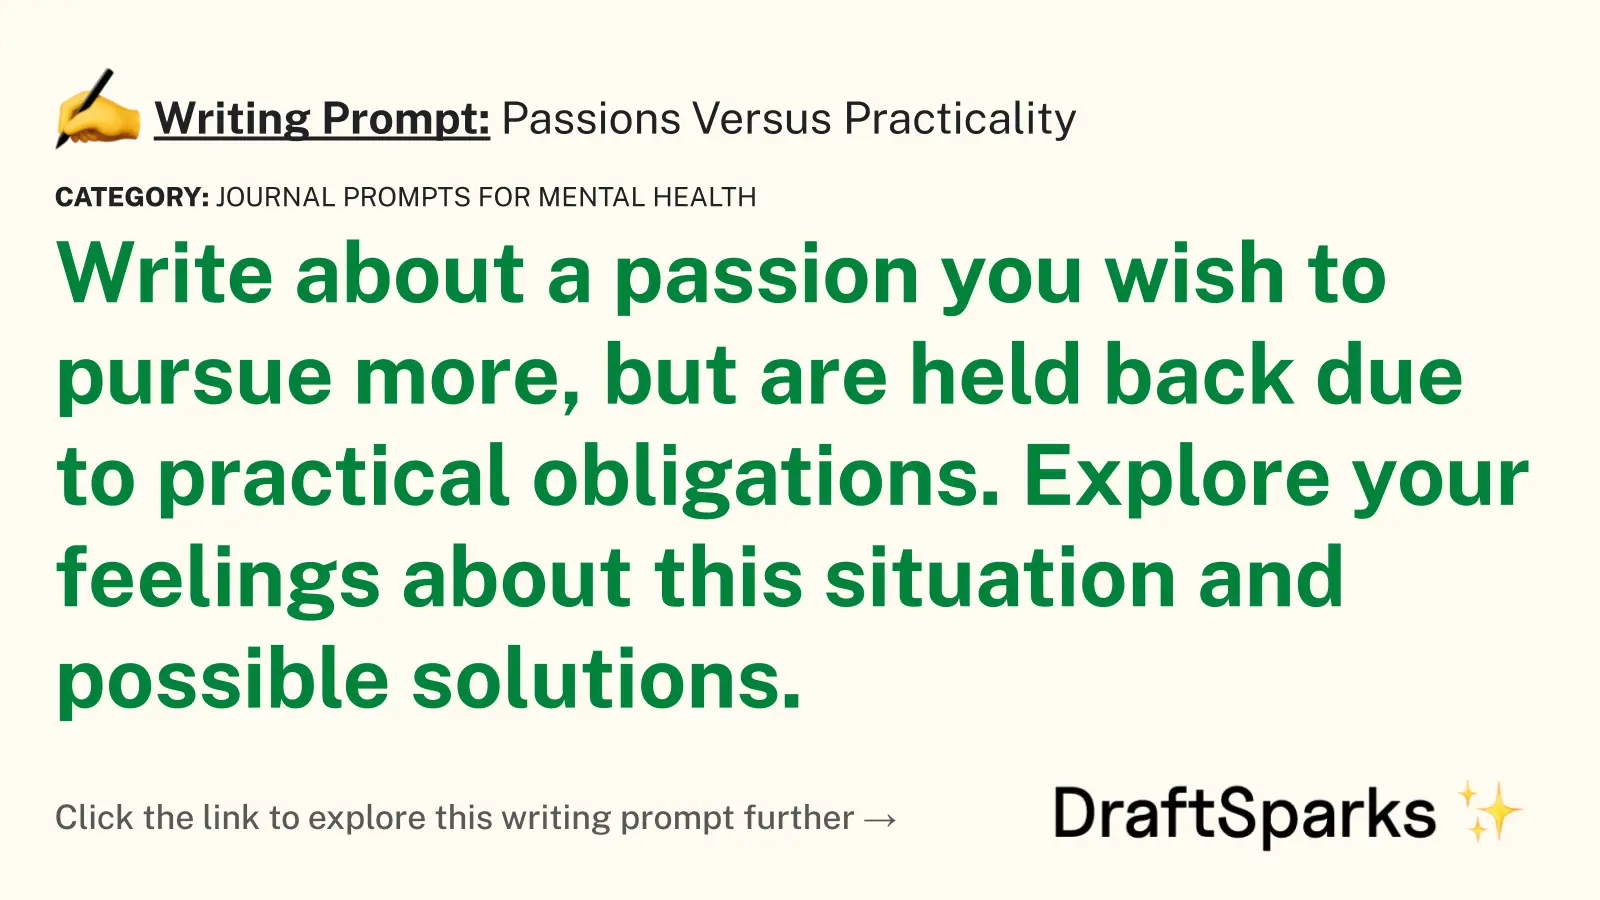 Passions Versus Practicality